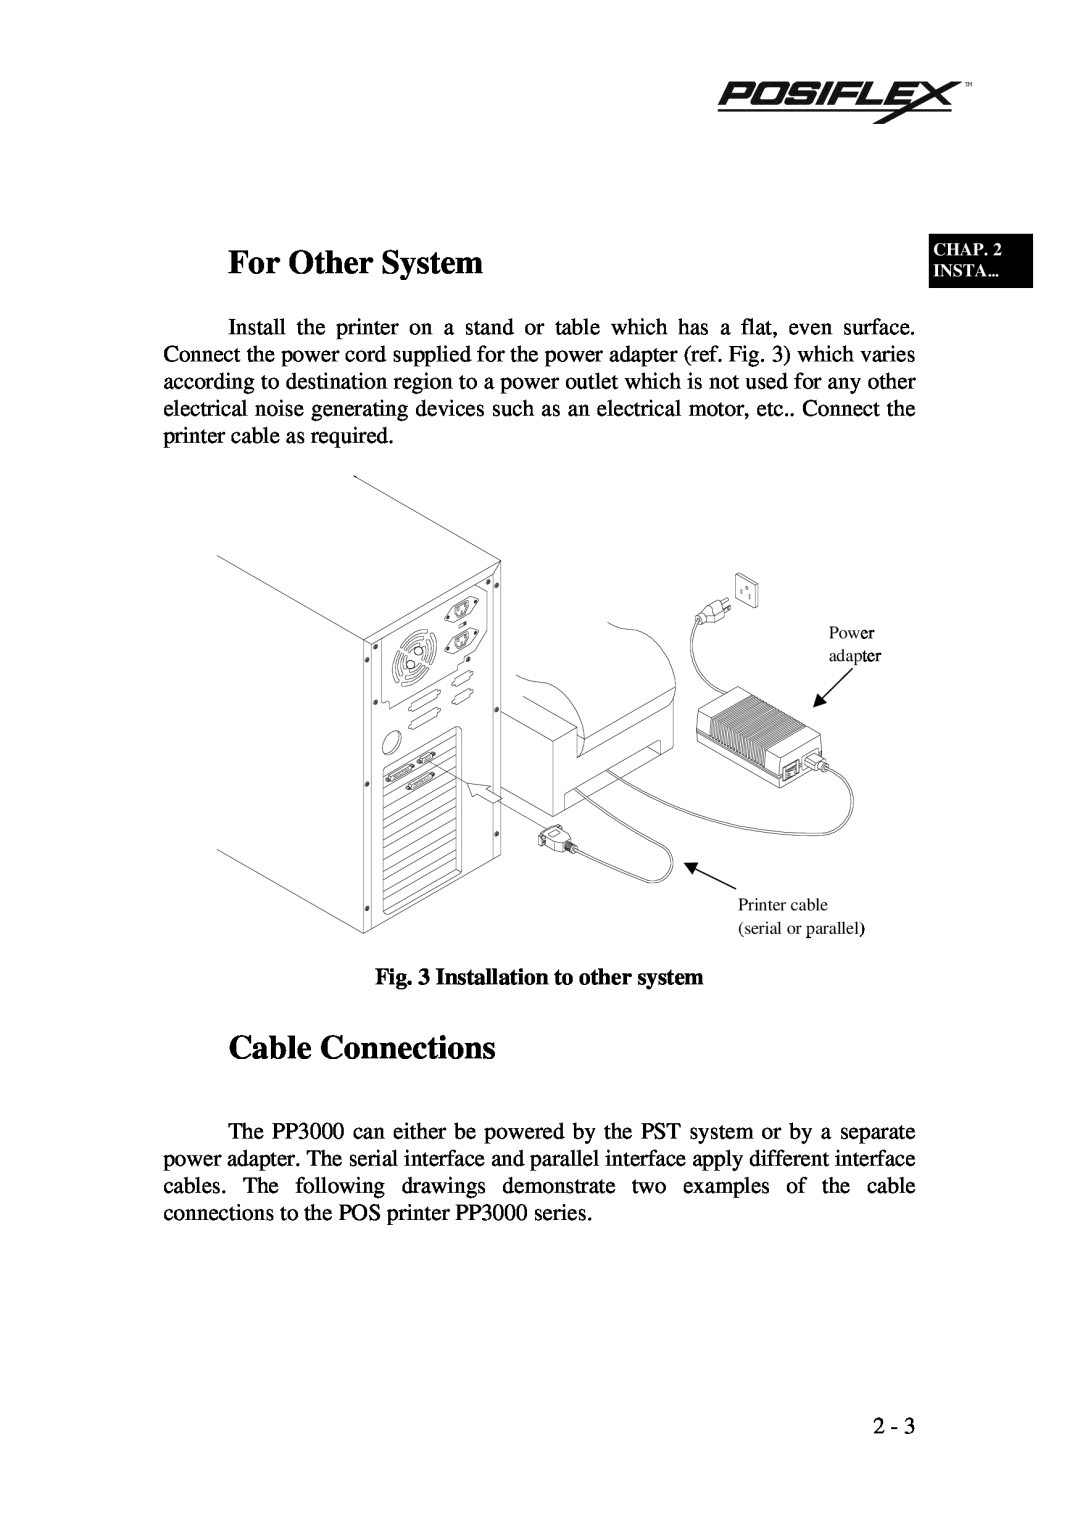 POSIFLEX Business Machines PP3000 manual For Other System, Cable Connections, Installation to other system 